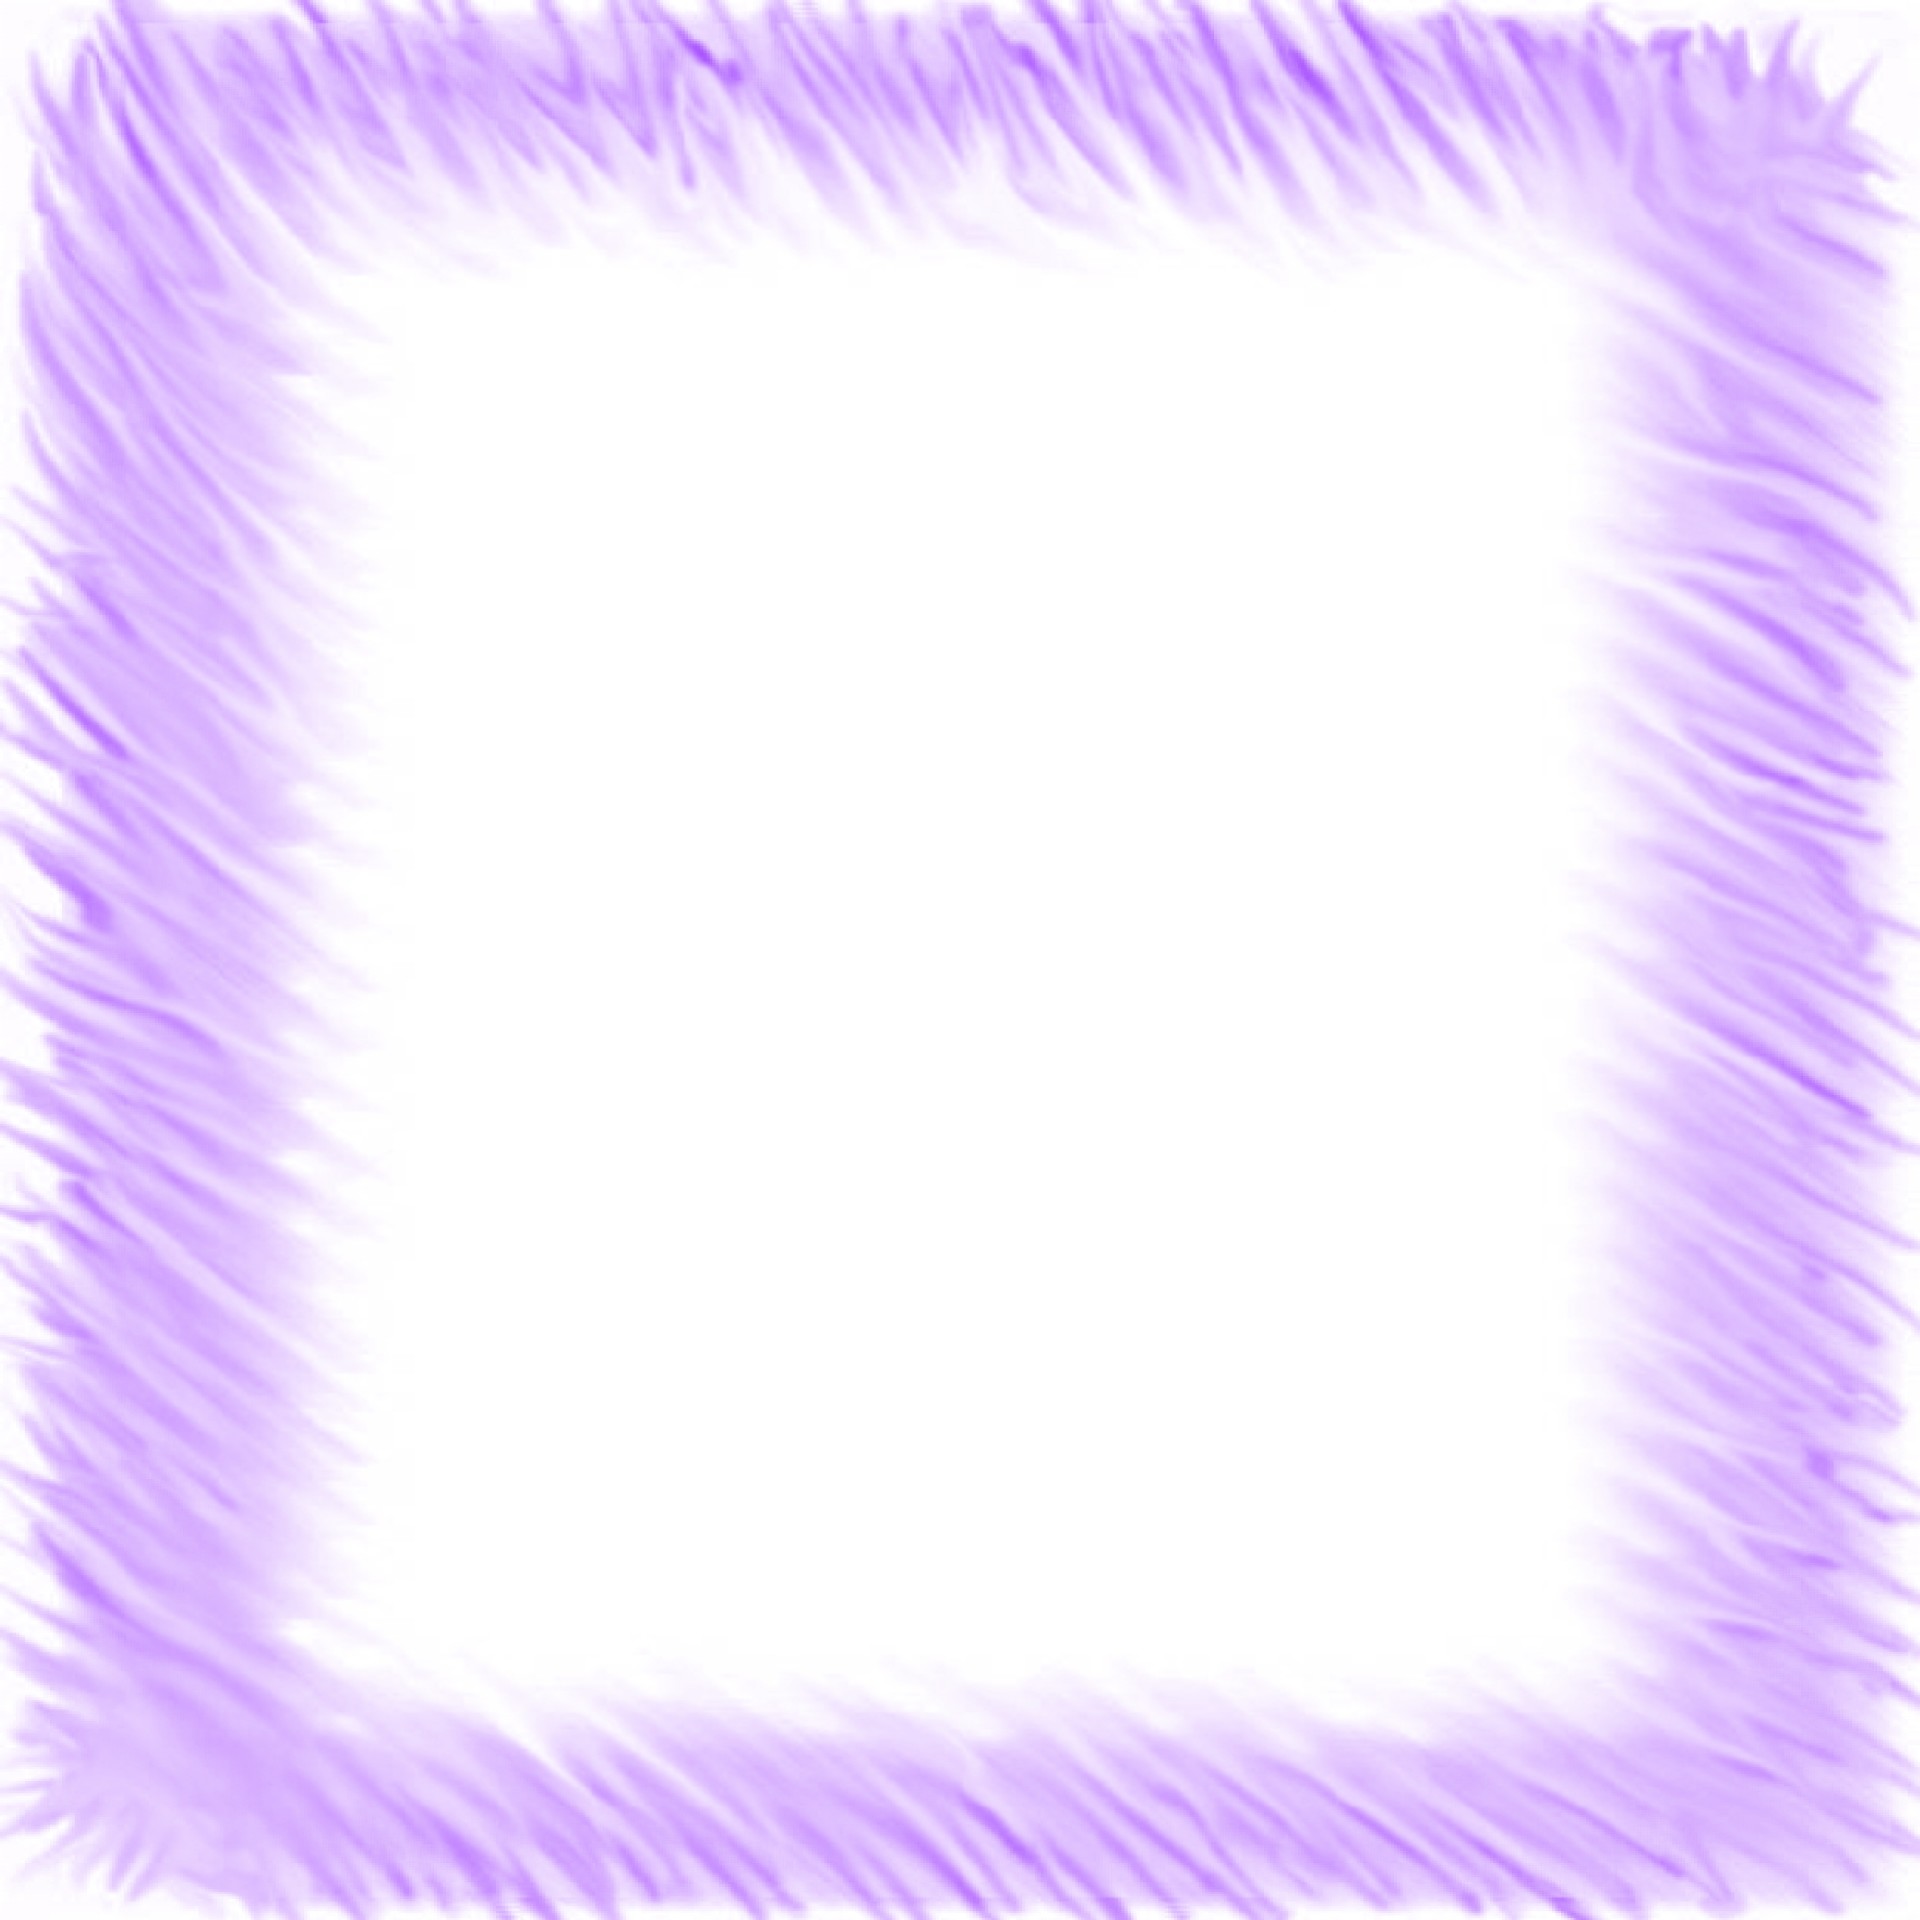 Violet Water Paint Frame